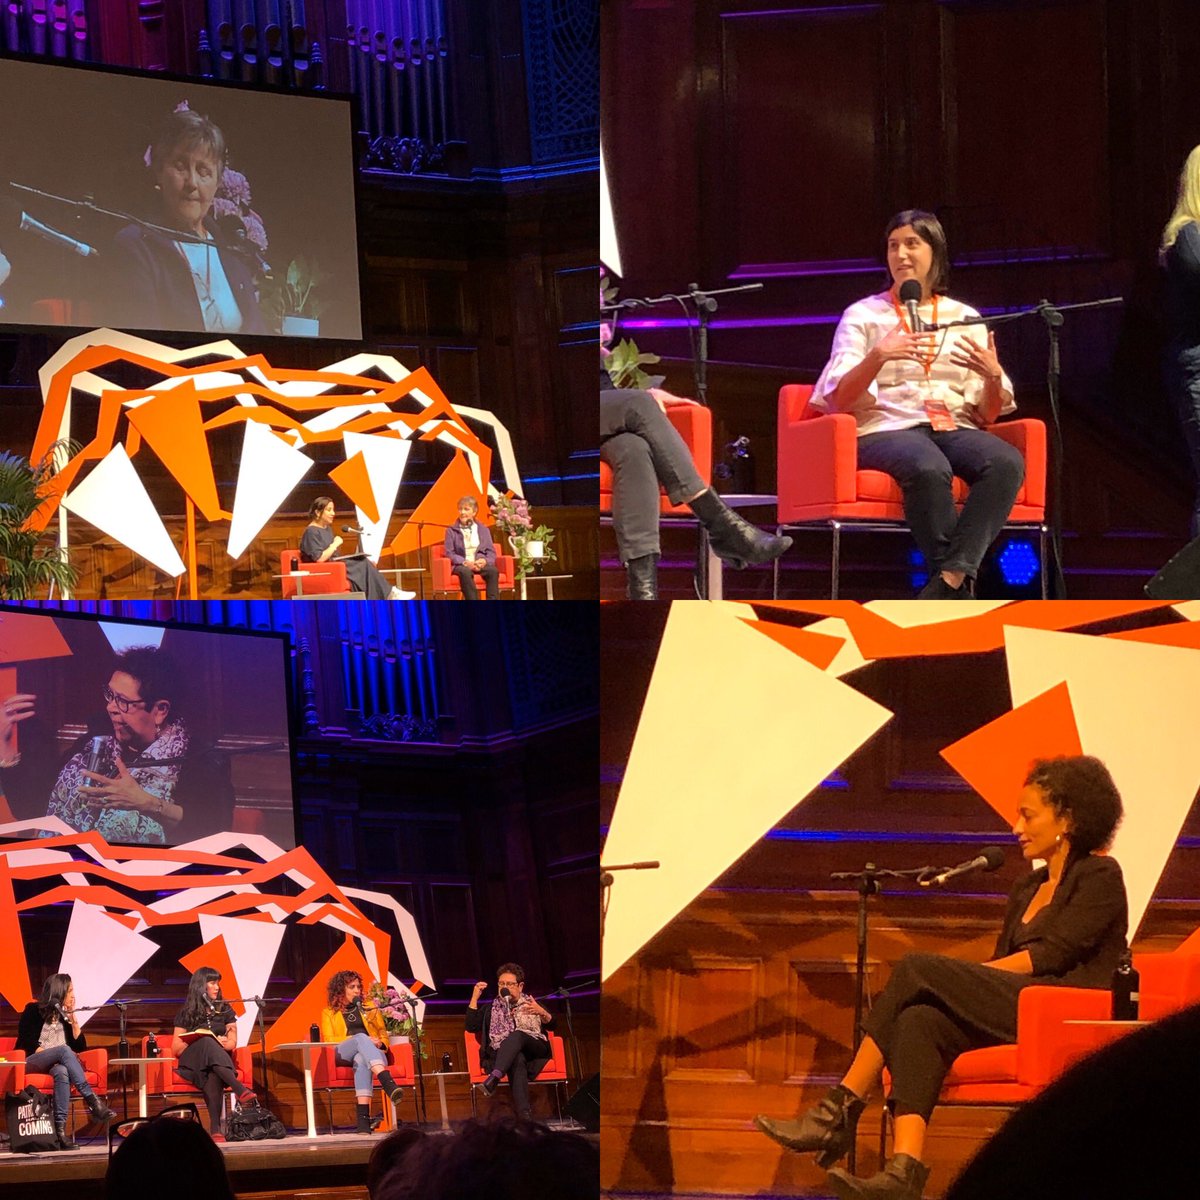 Amazing day of women and words at #broadside2019 Thanks to the #wheelercentre  ‘unapologetically feminist’ focus was unpacked, wrangled, confronted and celebrated. Writers’ gold. #HelenGarner #zadiesmith #aileenmoretonrobinson #curtissittenfeld